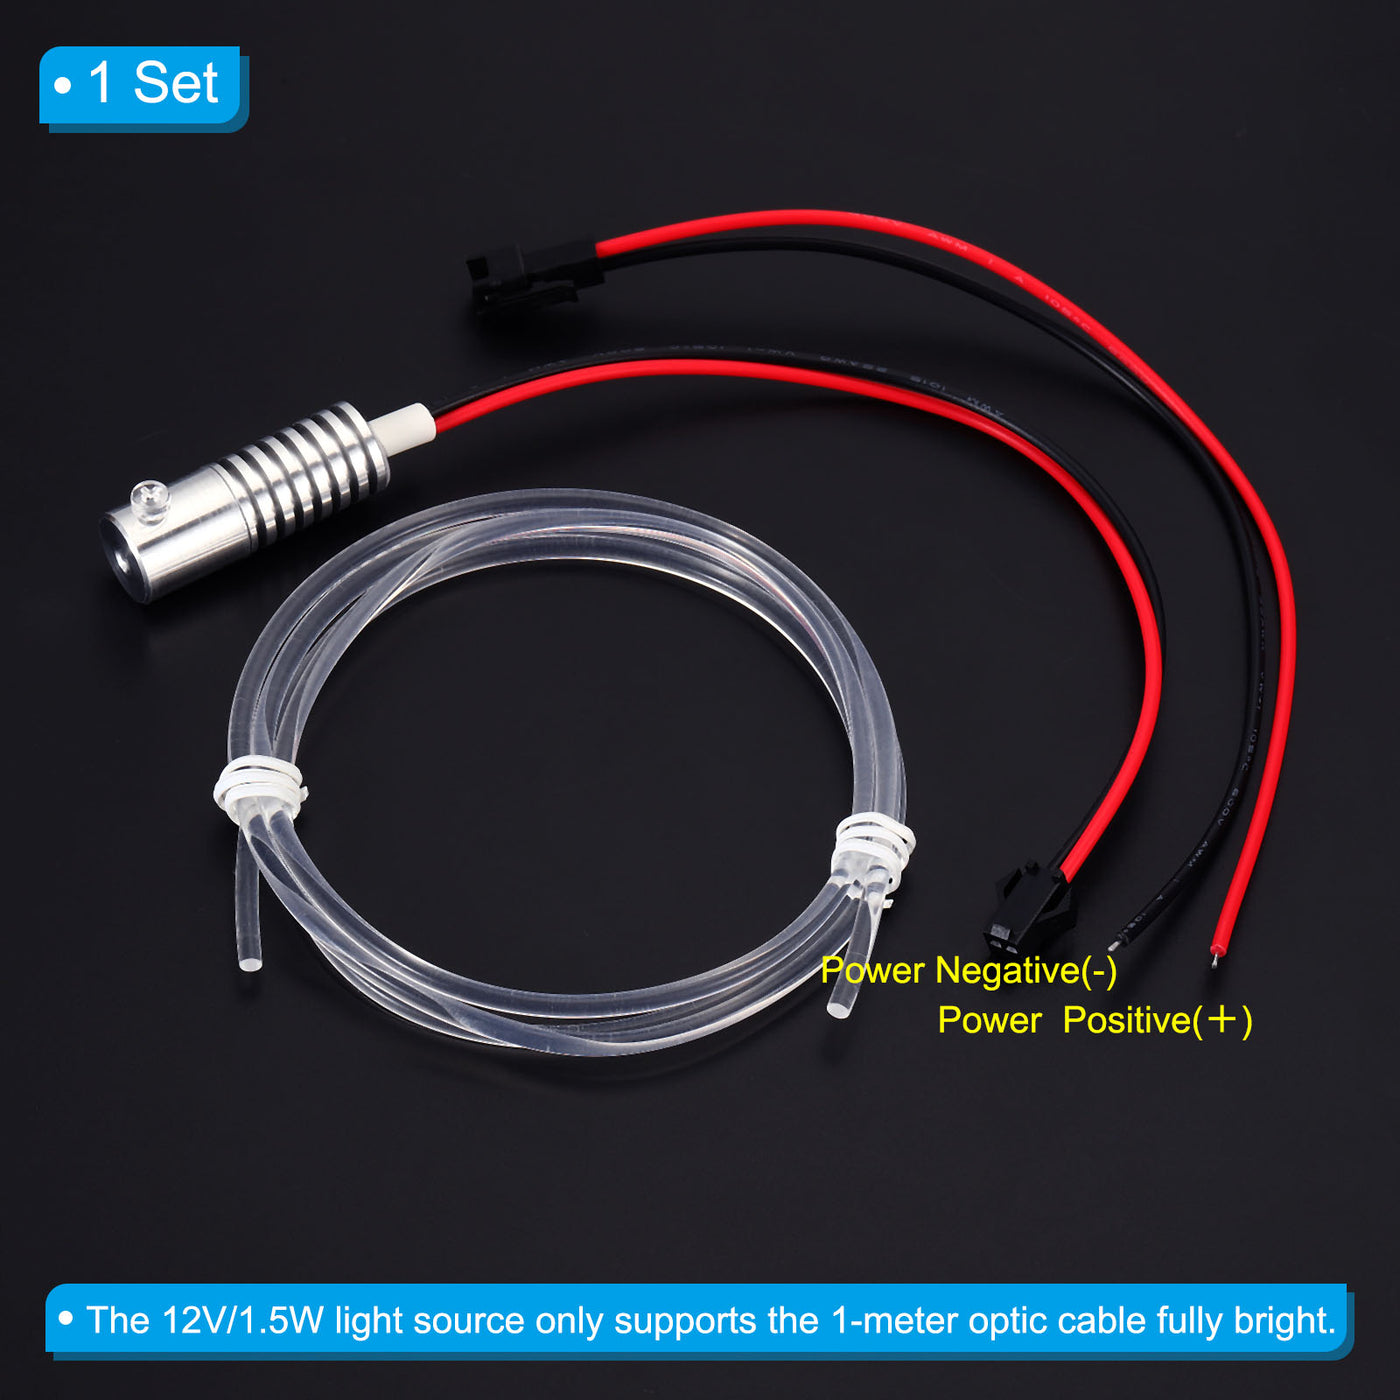 Harfington 3mm 1m PMMA Side Glow Fiber Optic Cable Kit, with LED Aluminum Illuminator 12V 1.5W Guide Light Source Decoration for Home DIY Lighting, Cool White